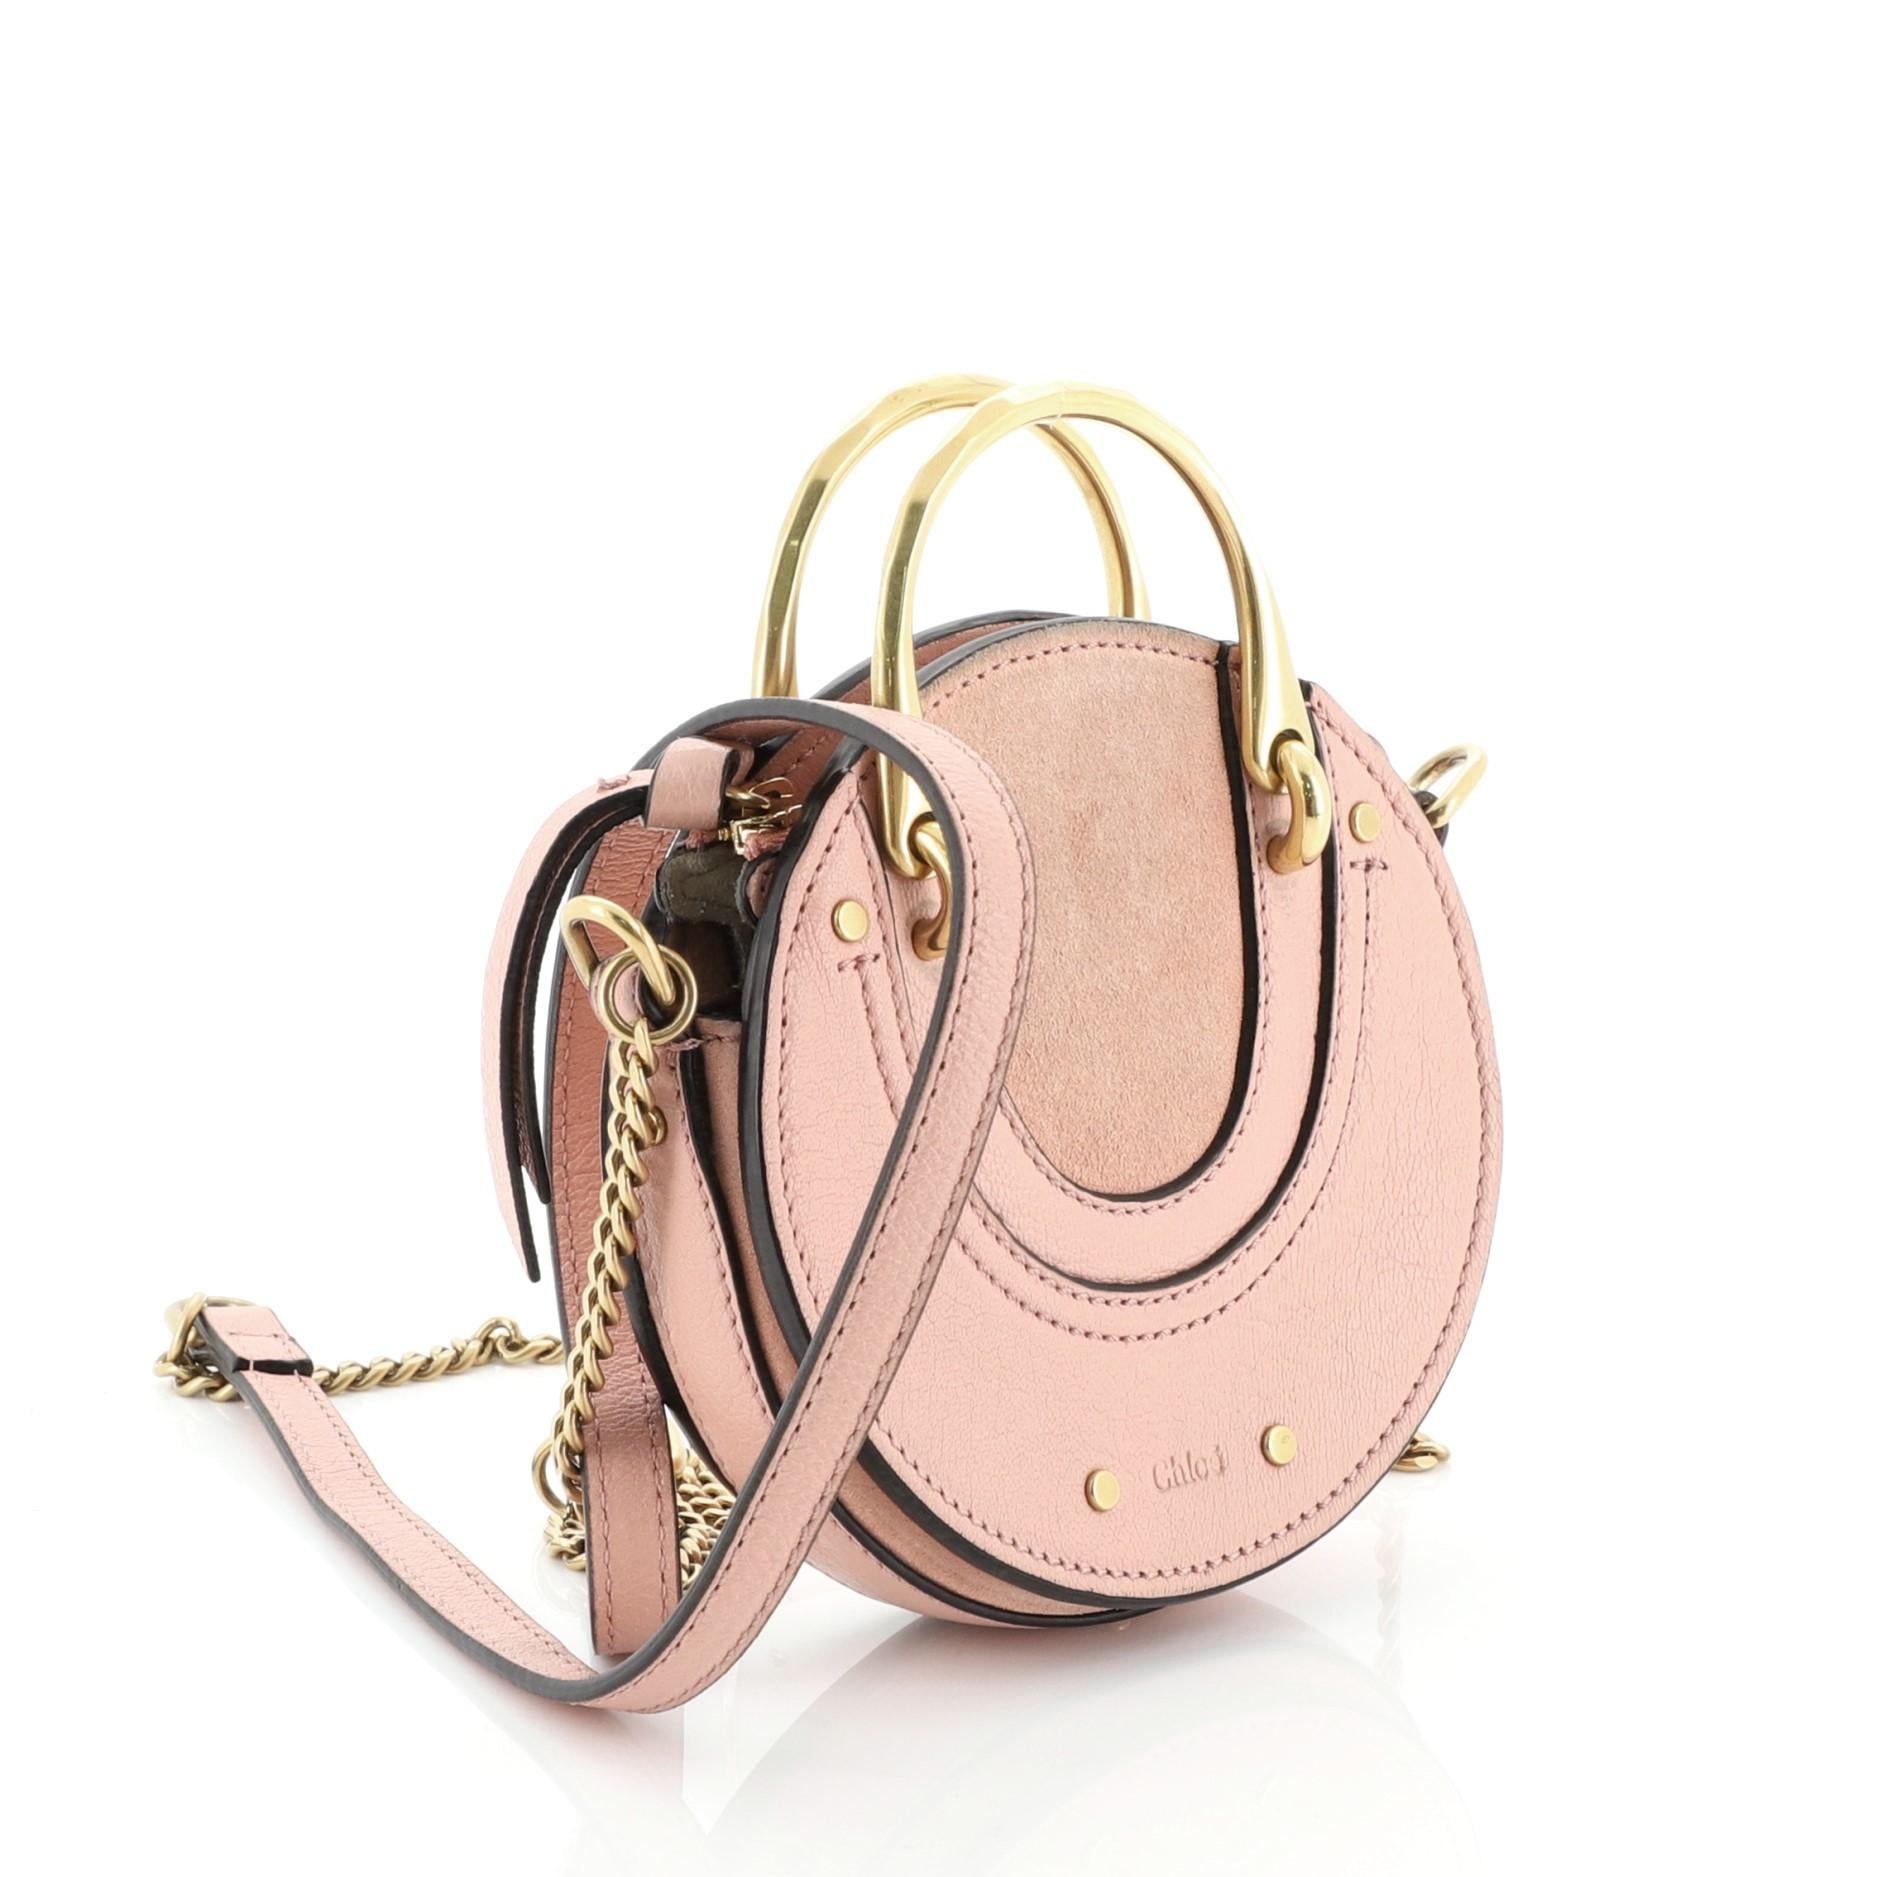 This Chloe Pixie Crossbody Bag Leather with Suede Mini, crafted in pink leather with suede, features a top handle, chain link shoulder strap, and aged gold-tone hardware. Its zip closure opens to a neutral suede interior with two separate